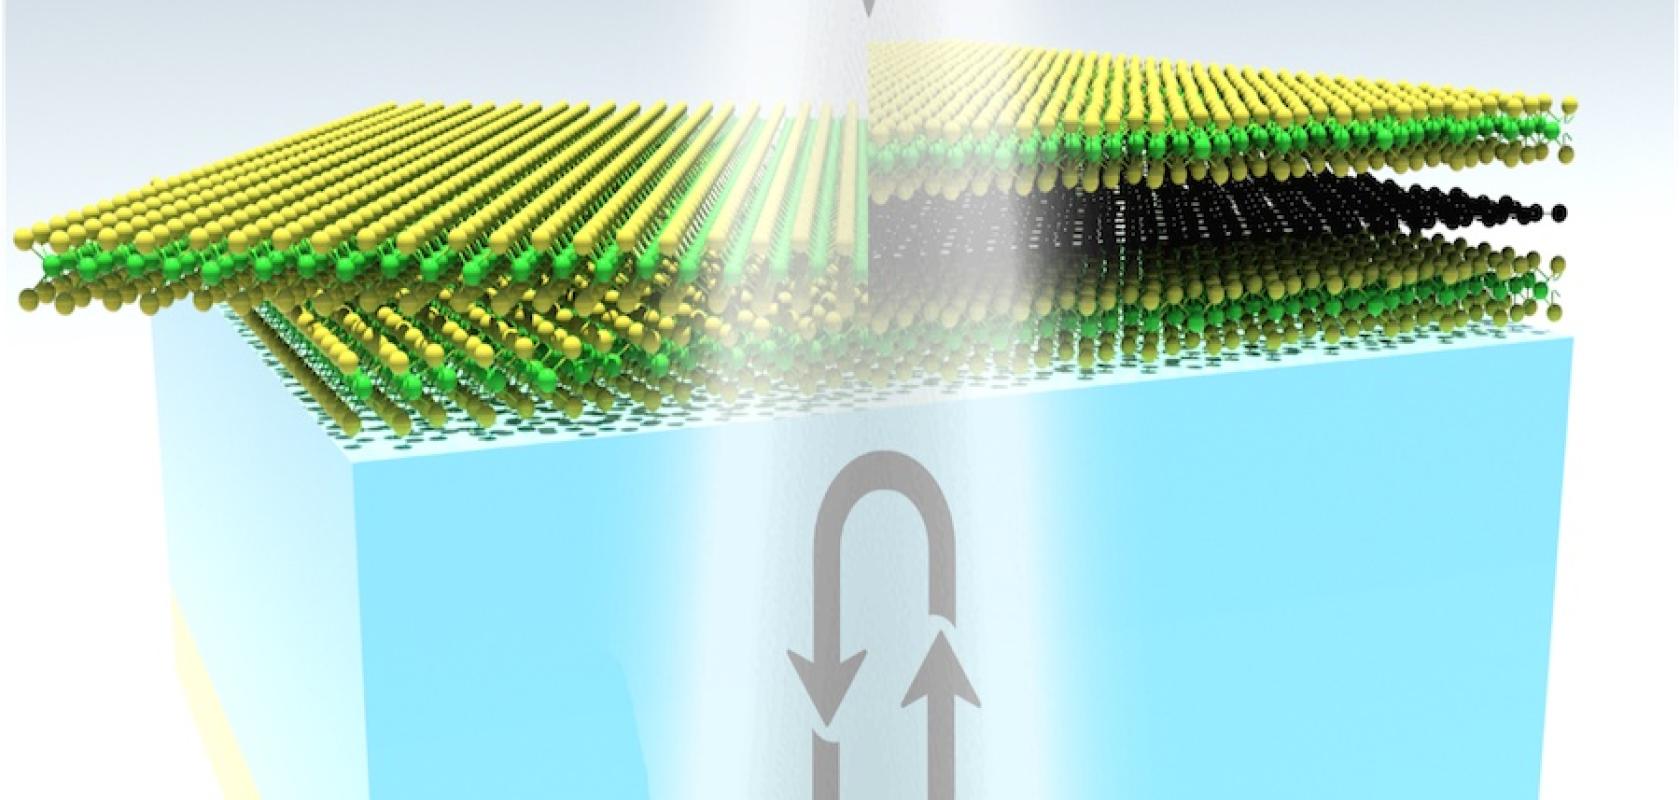 University of Minnesota researchers made a “near-perfect absorber”